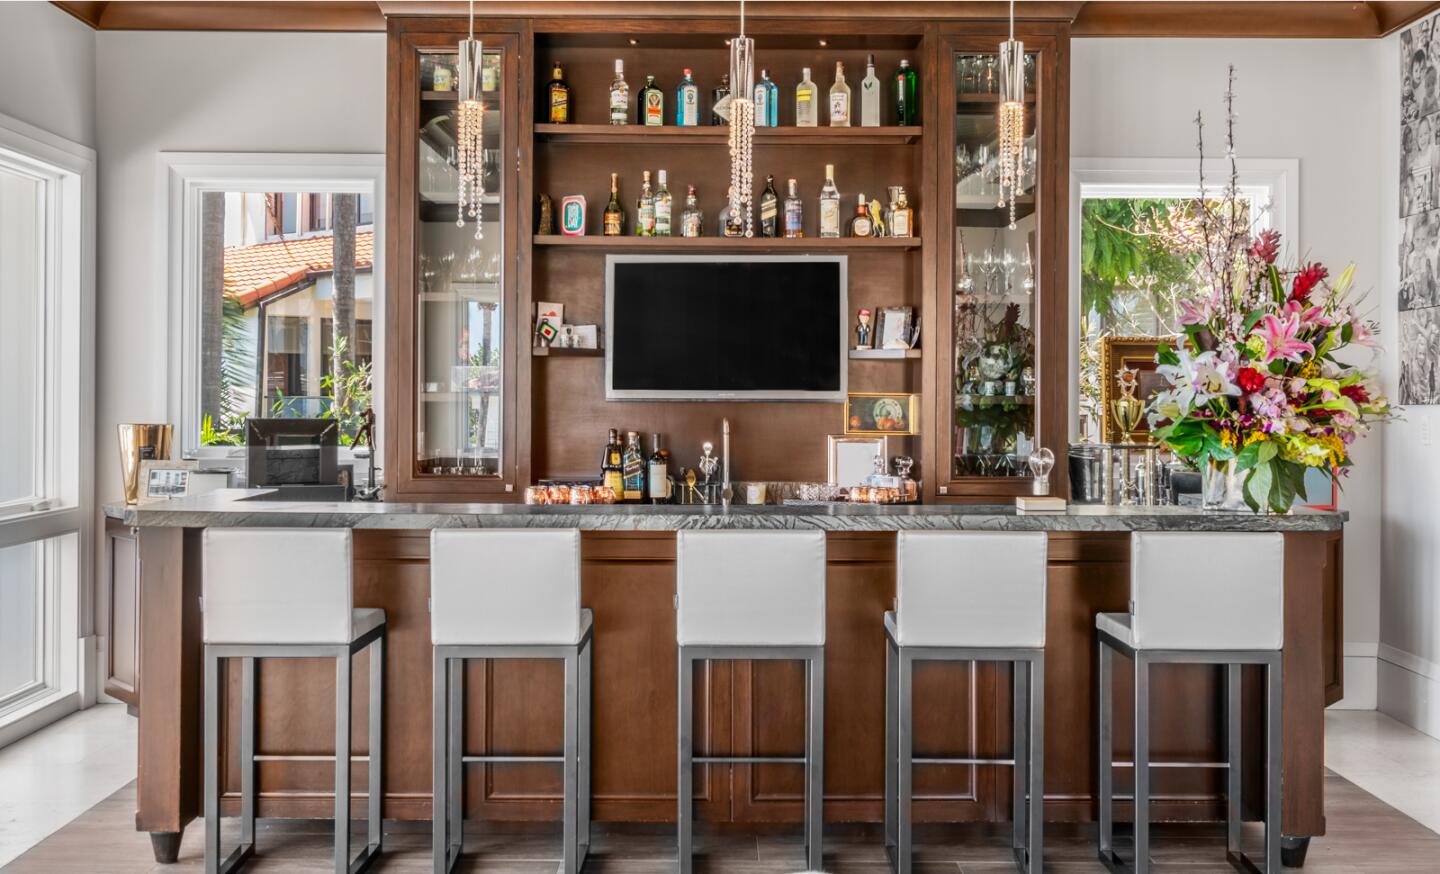 Seating for five at the wet bar.